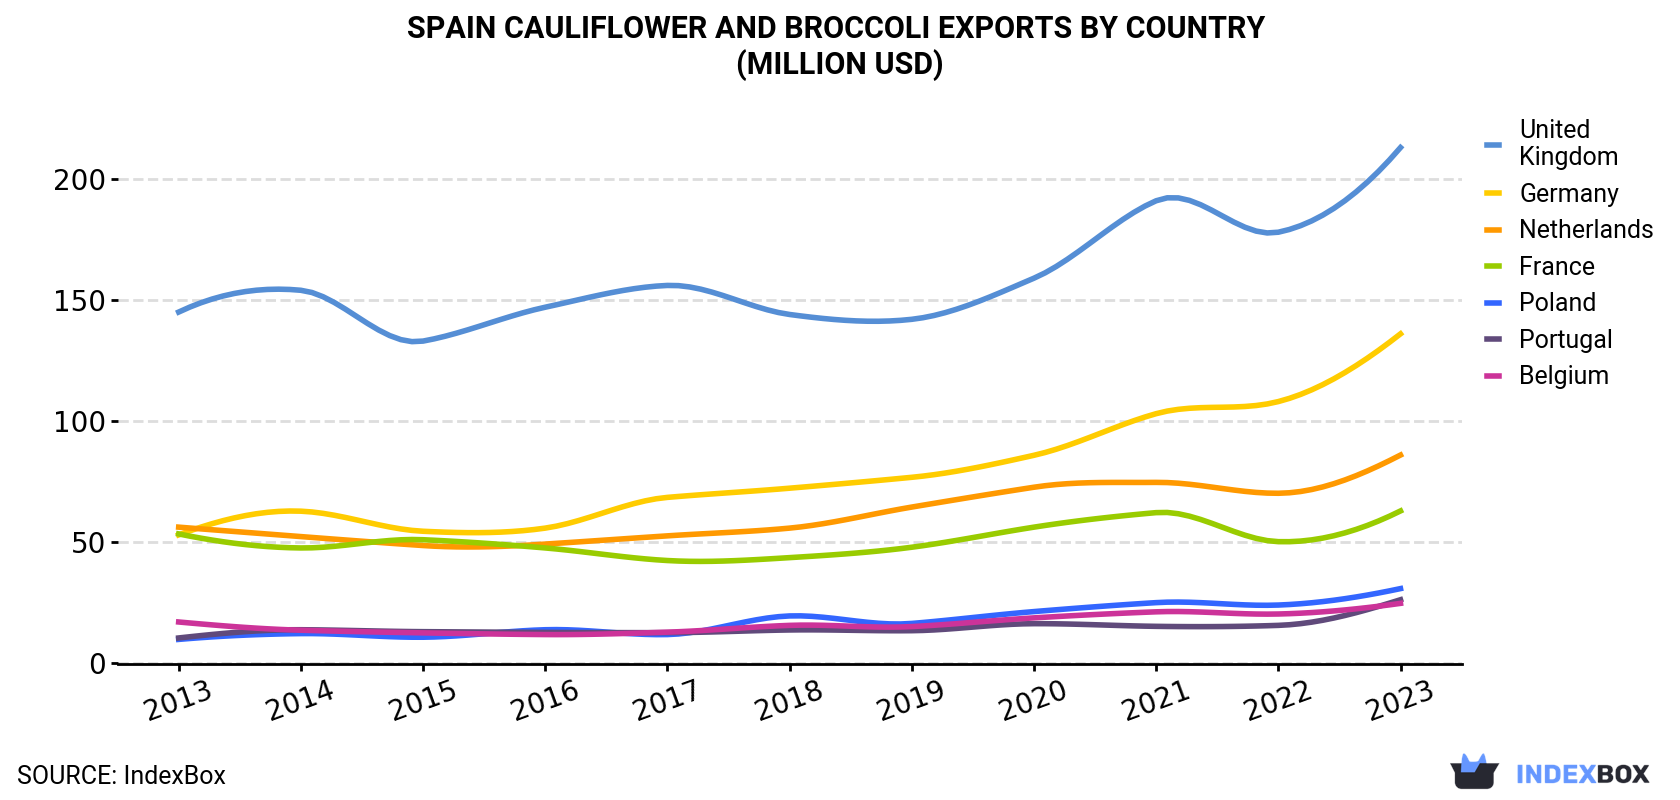 Spain Cauliflower And Broccoli Exports By Country (Million USD)